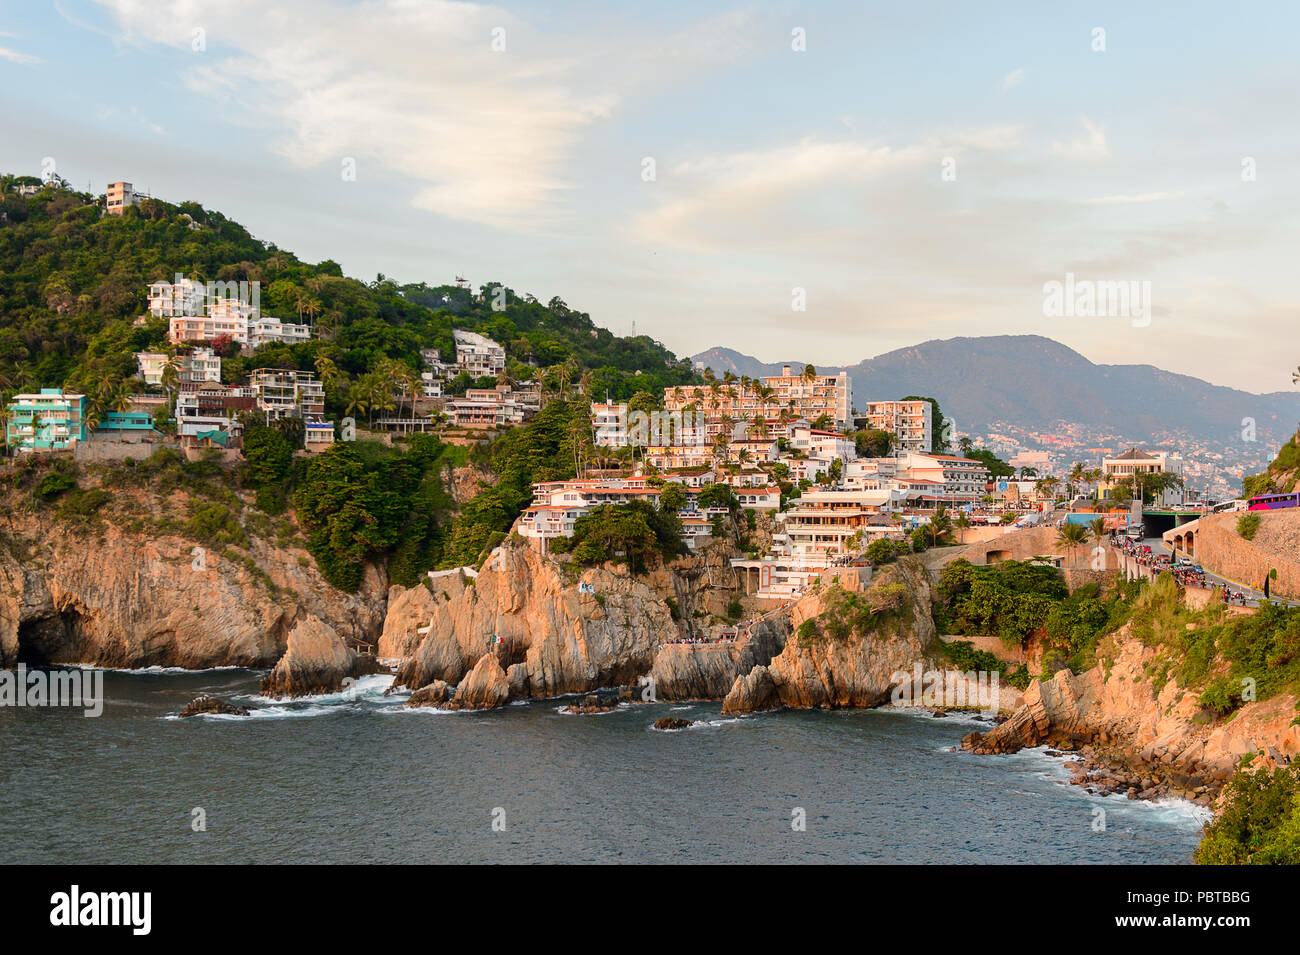 The rock La Quebrada, one of the most famous tourist attractions in Acapulco, Mexico. Stock Photo